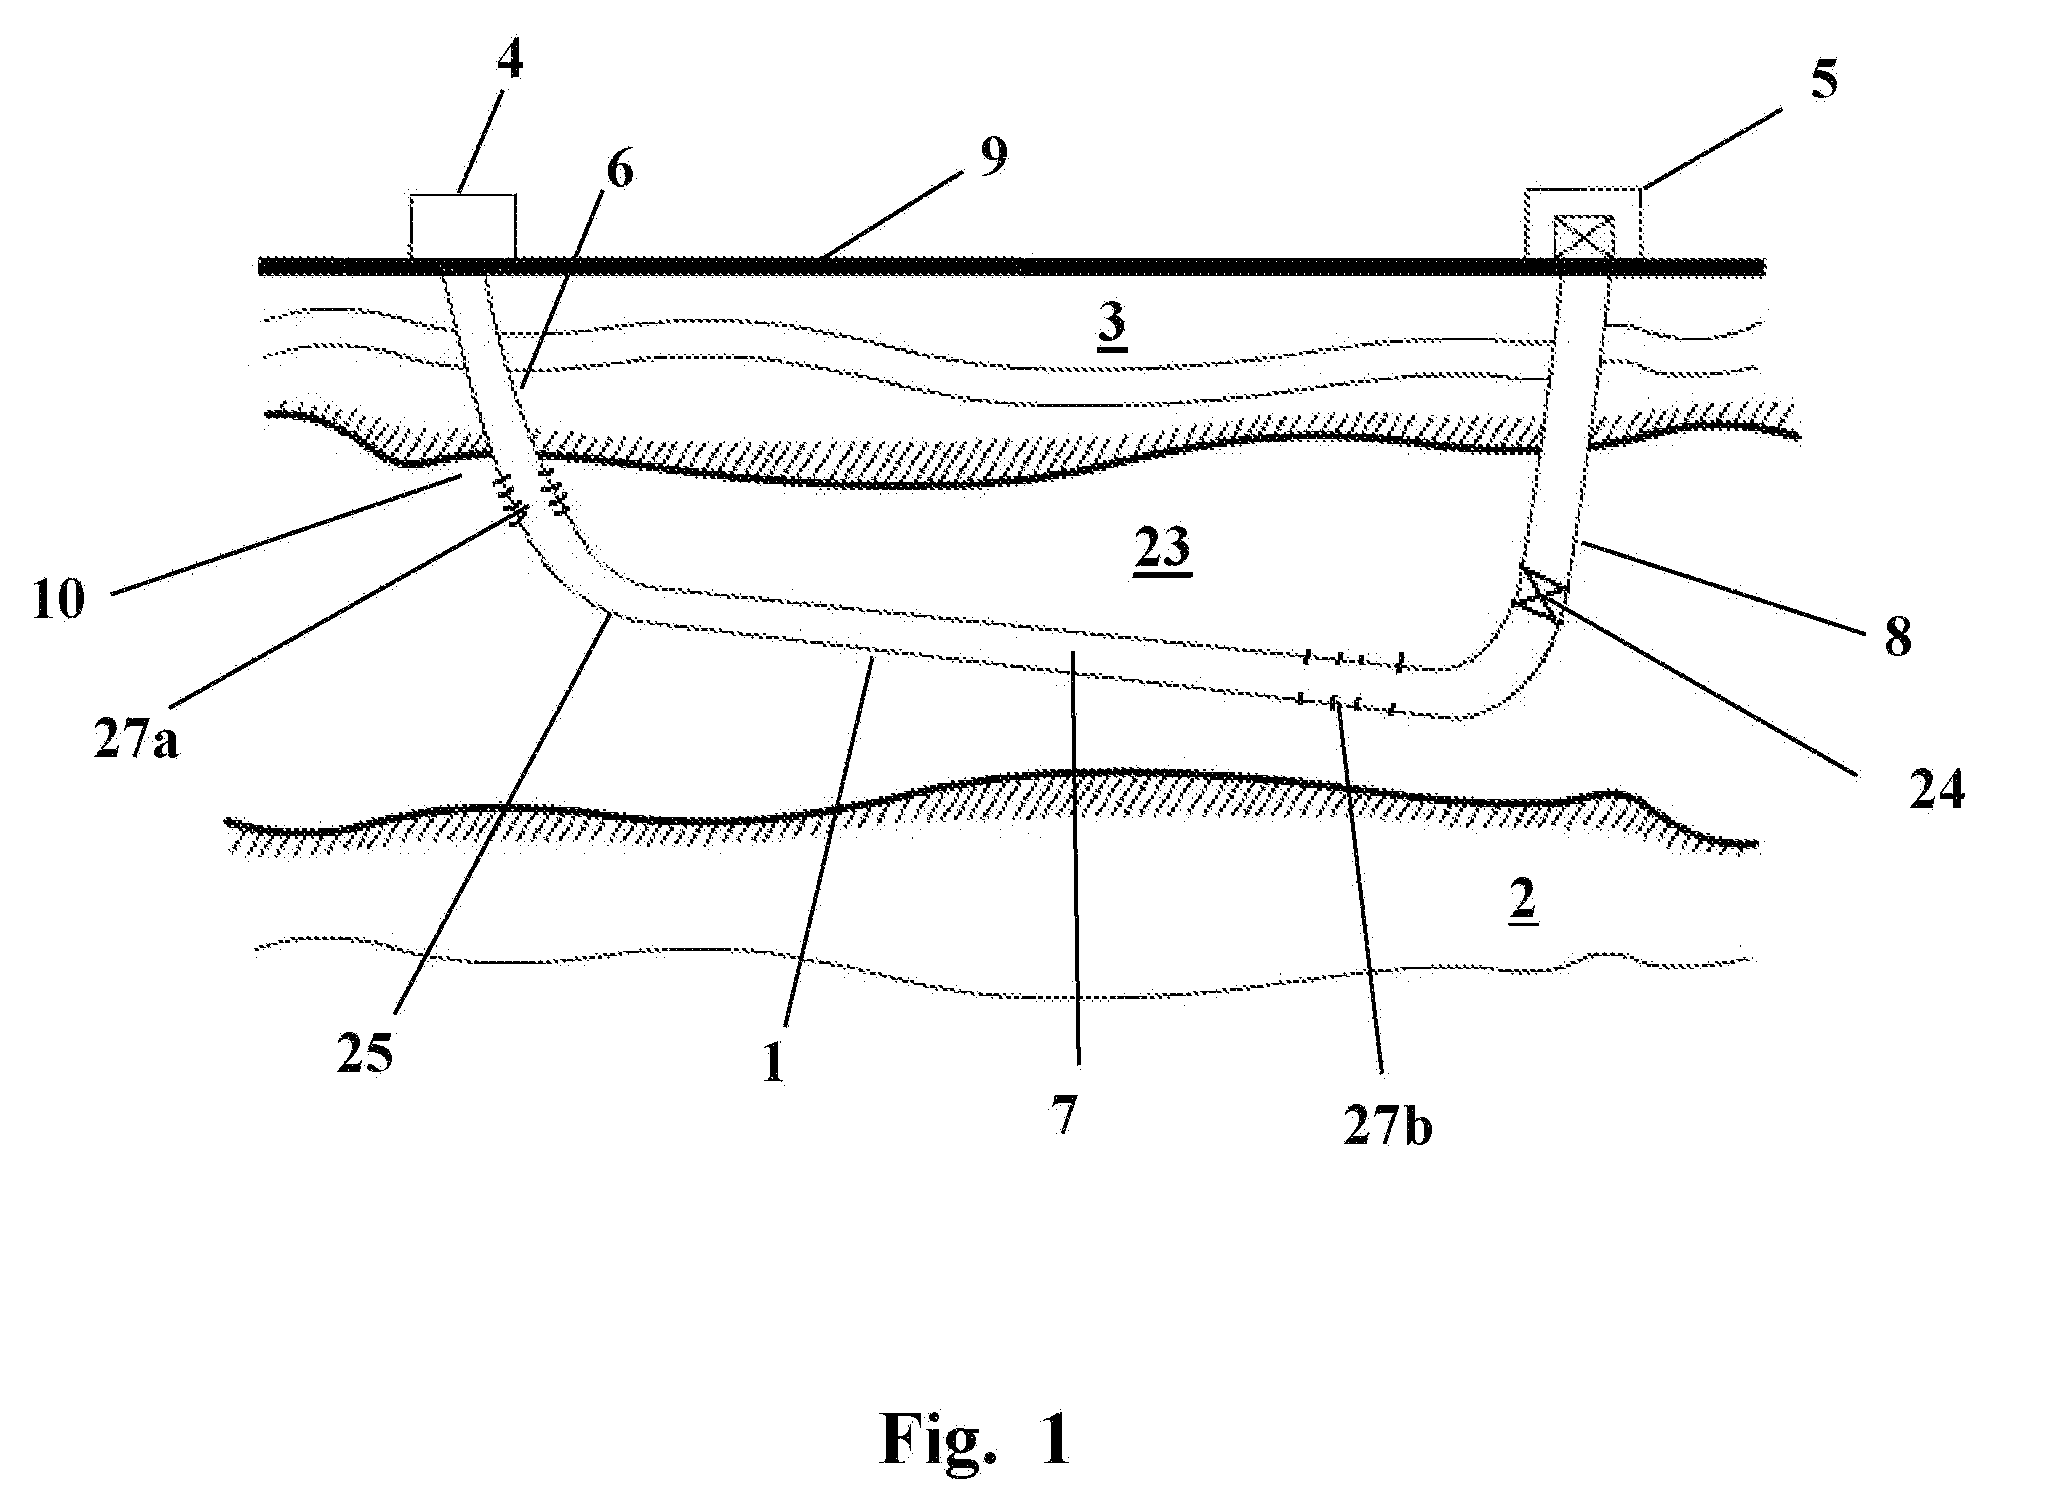 Method for Recovering Hydrocarbons from Subterranean Formations